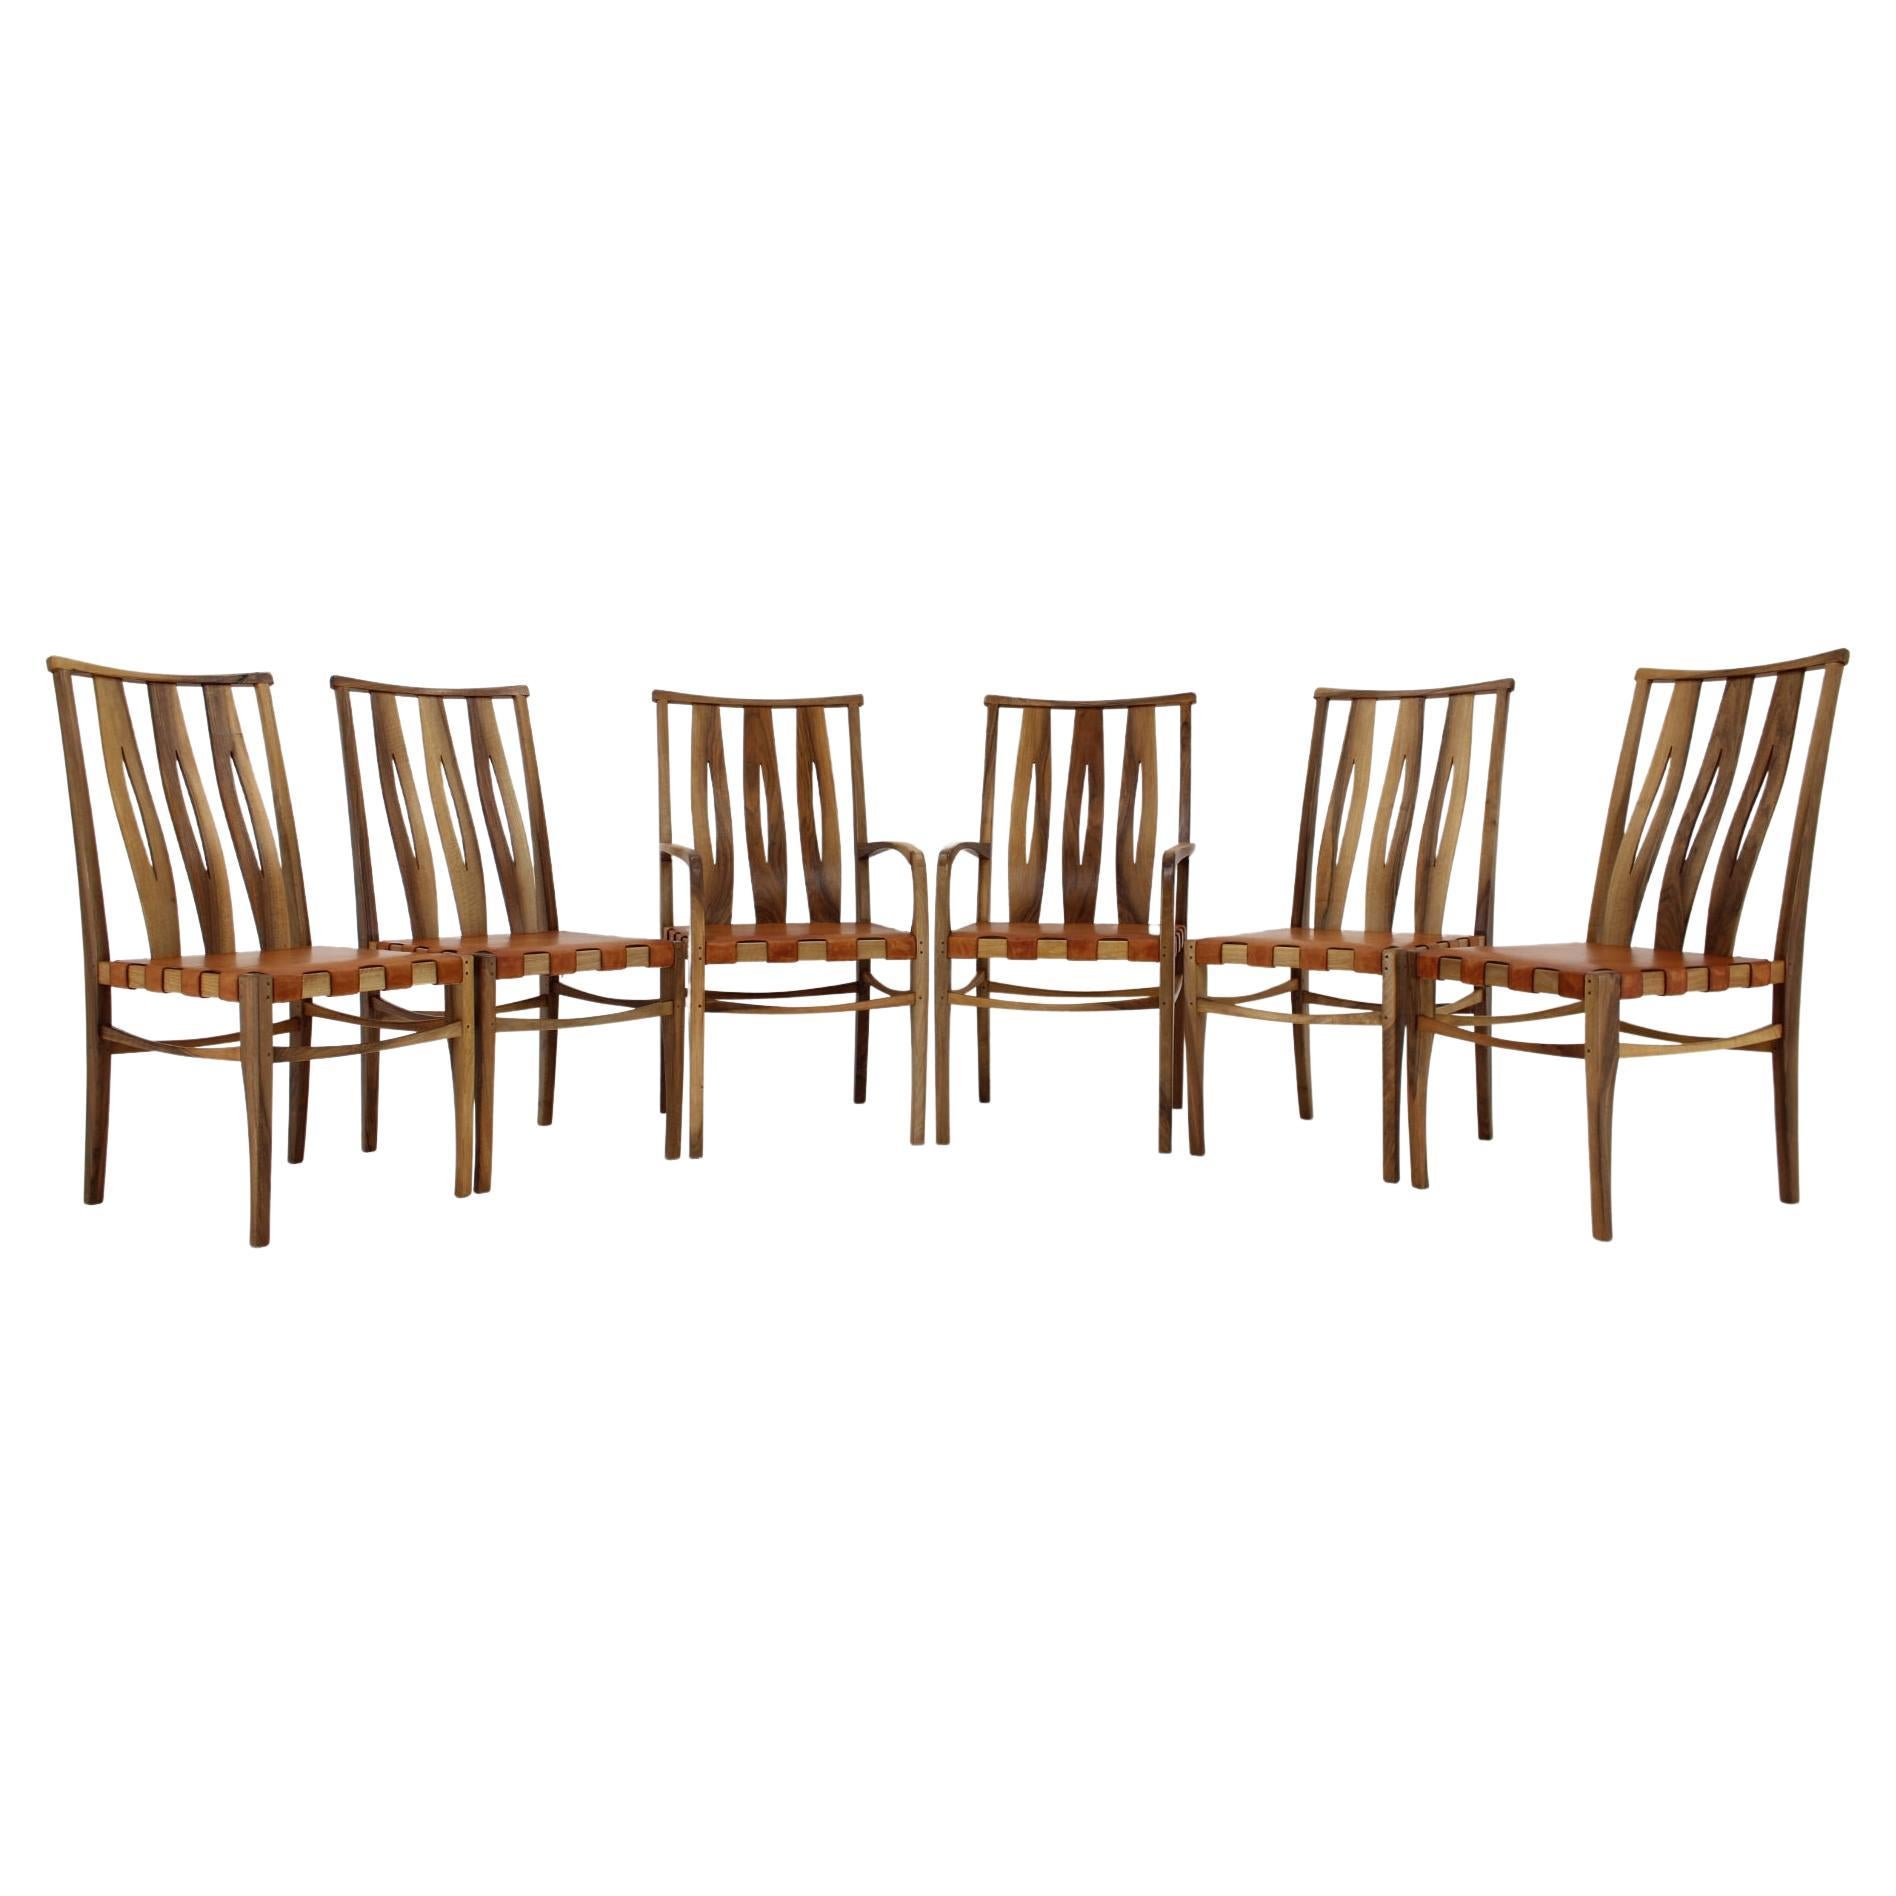 2001 One of a Kind Custom Made Set of Walnut and Leather Dining Chairs, Set of 6